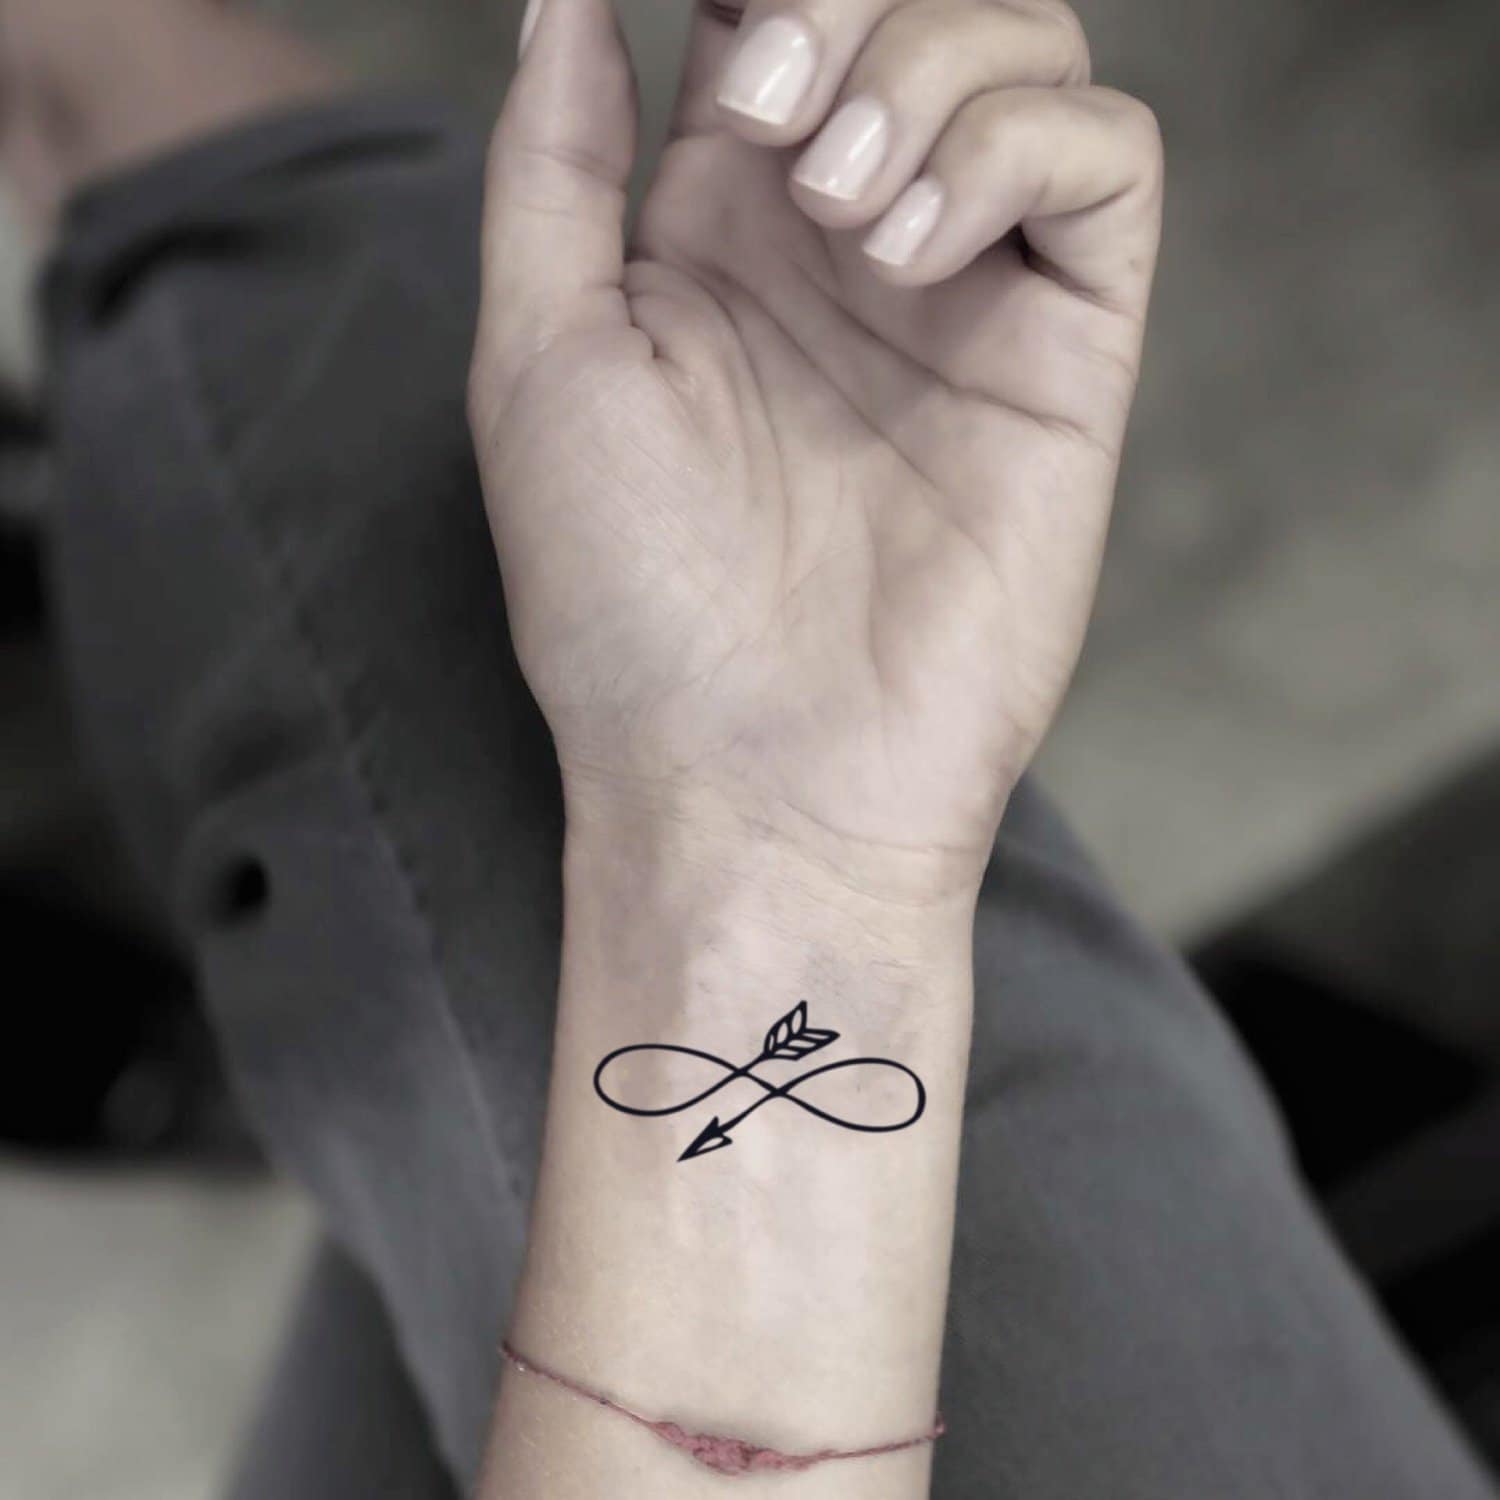 Unique Arrow Tattoos Design with Meanings - So Simple Yet Meaningful | Arrow  tattoo design, Arrow tattoos for women, Small arrow tattoos